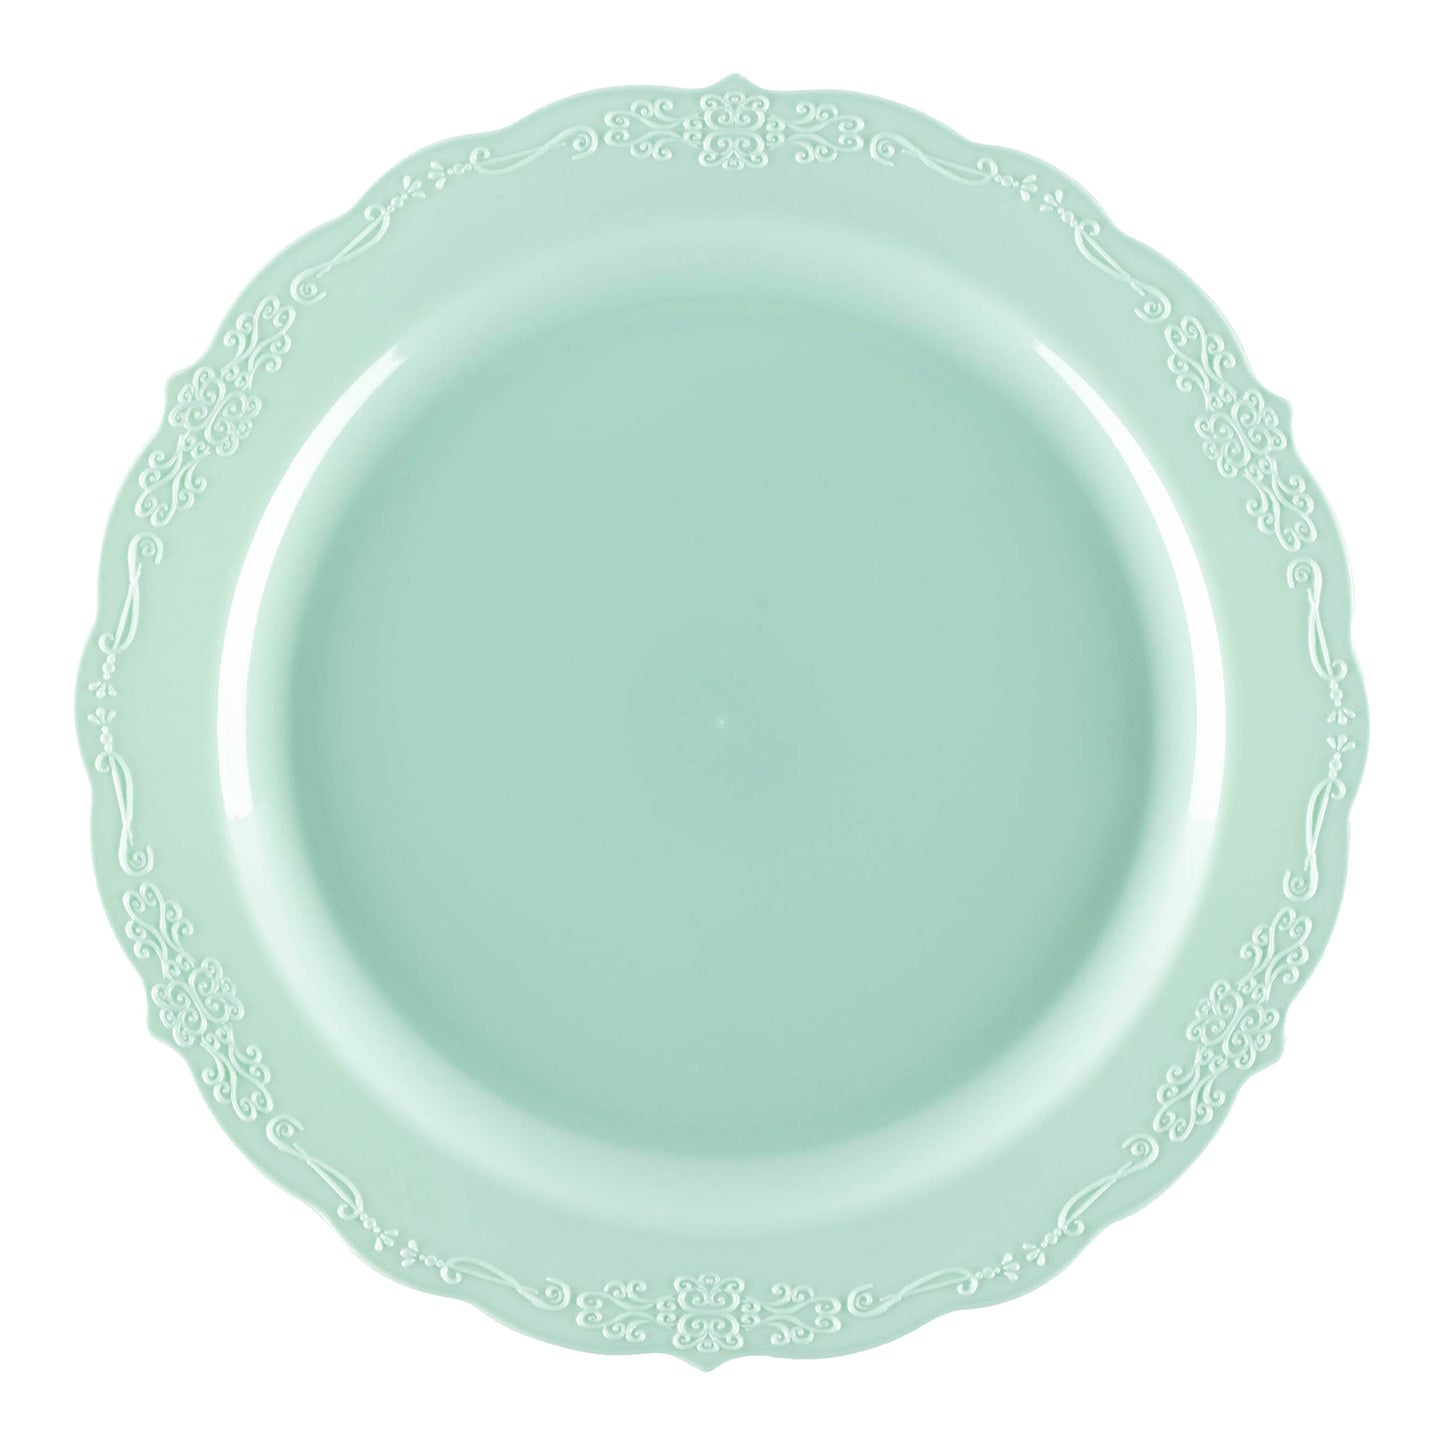 Turquoise Vintage Round Disposable Plastic Dinner Plates (10") | The Kaya Collection